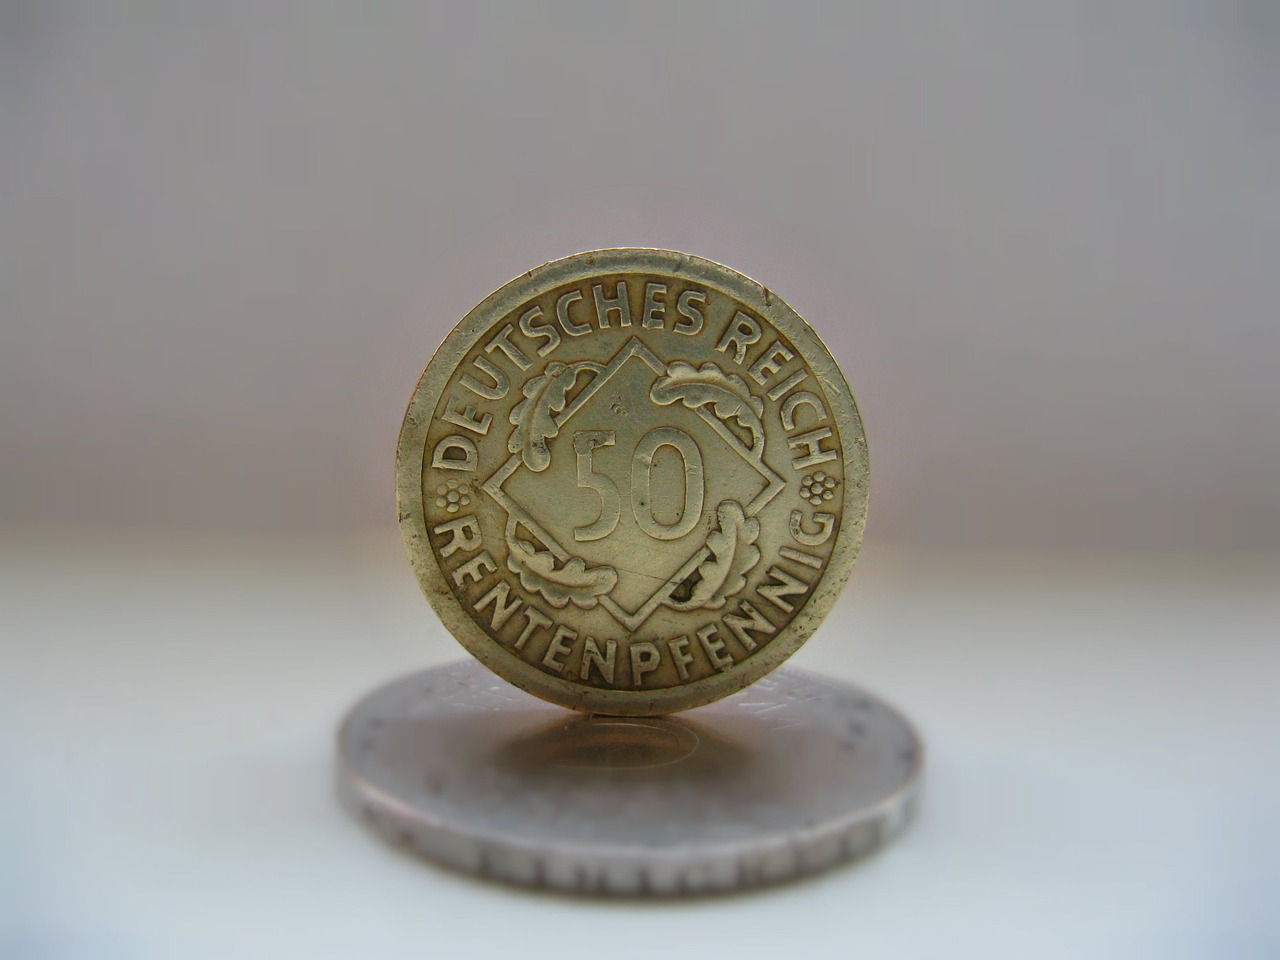 pensions pfennig pensions mark inflation free photo